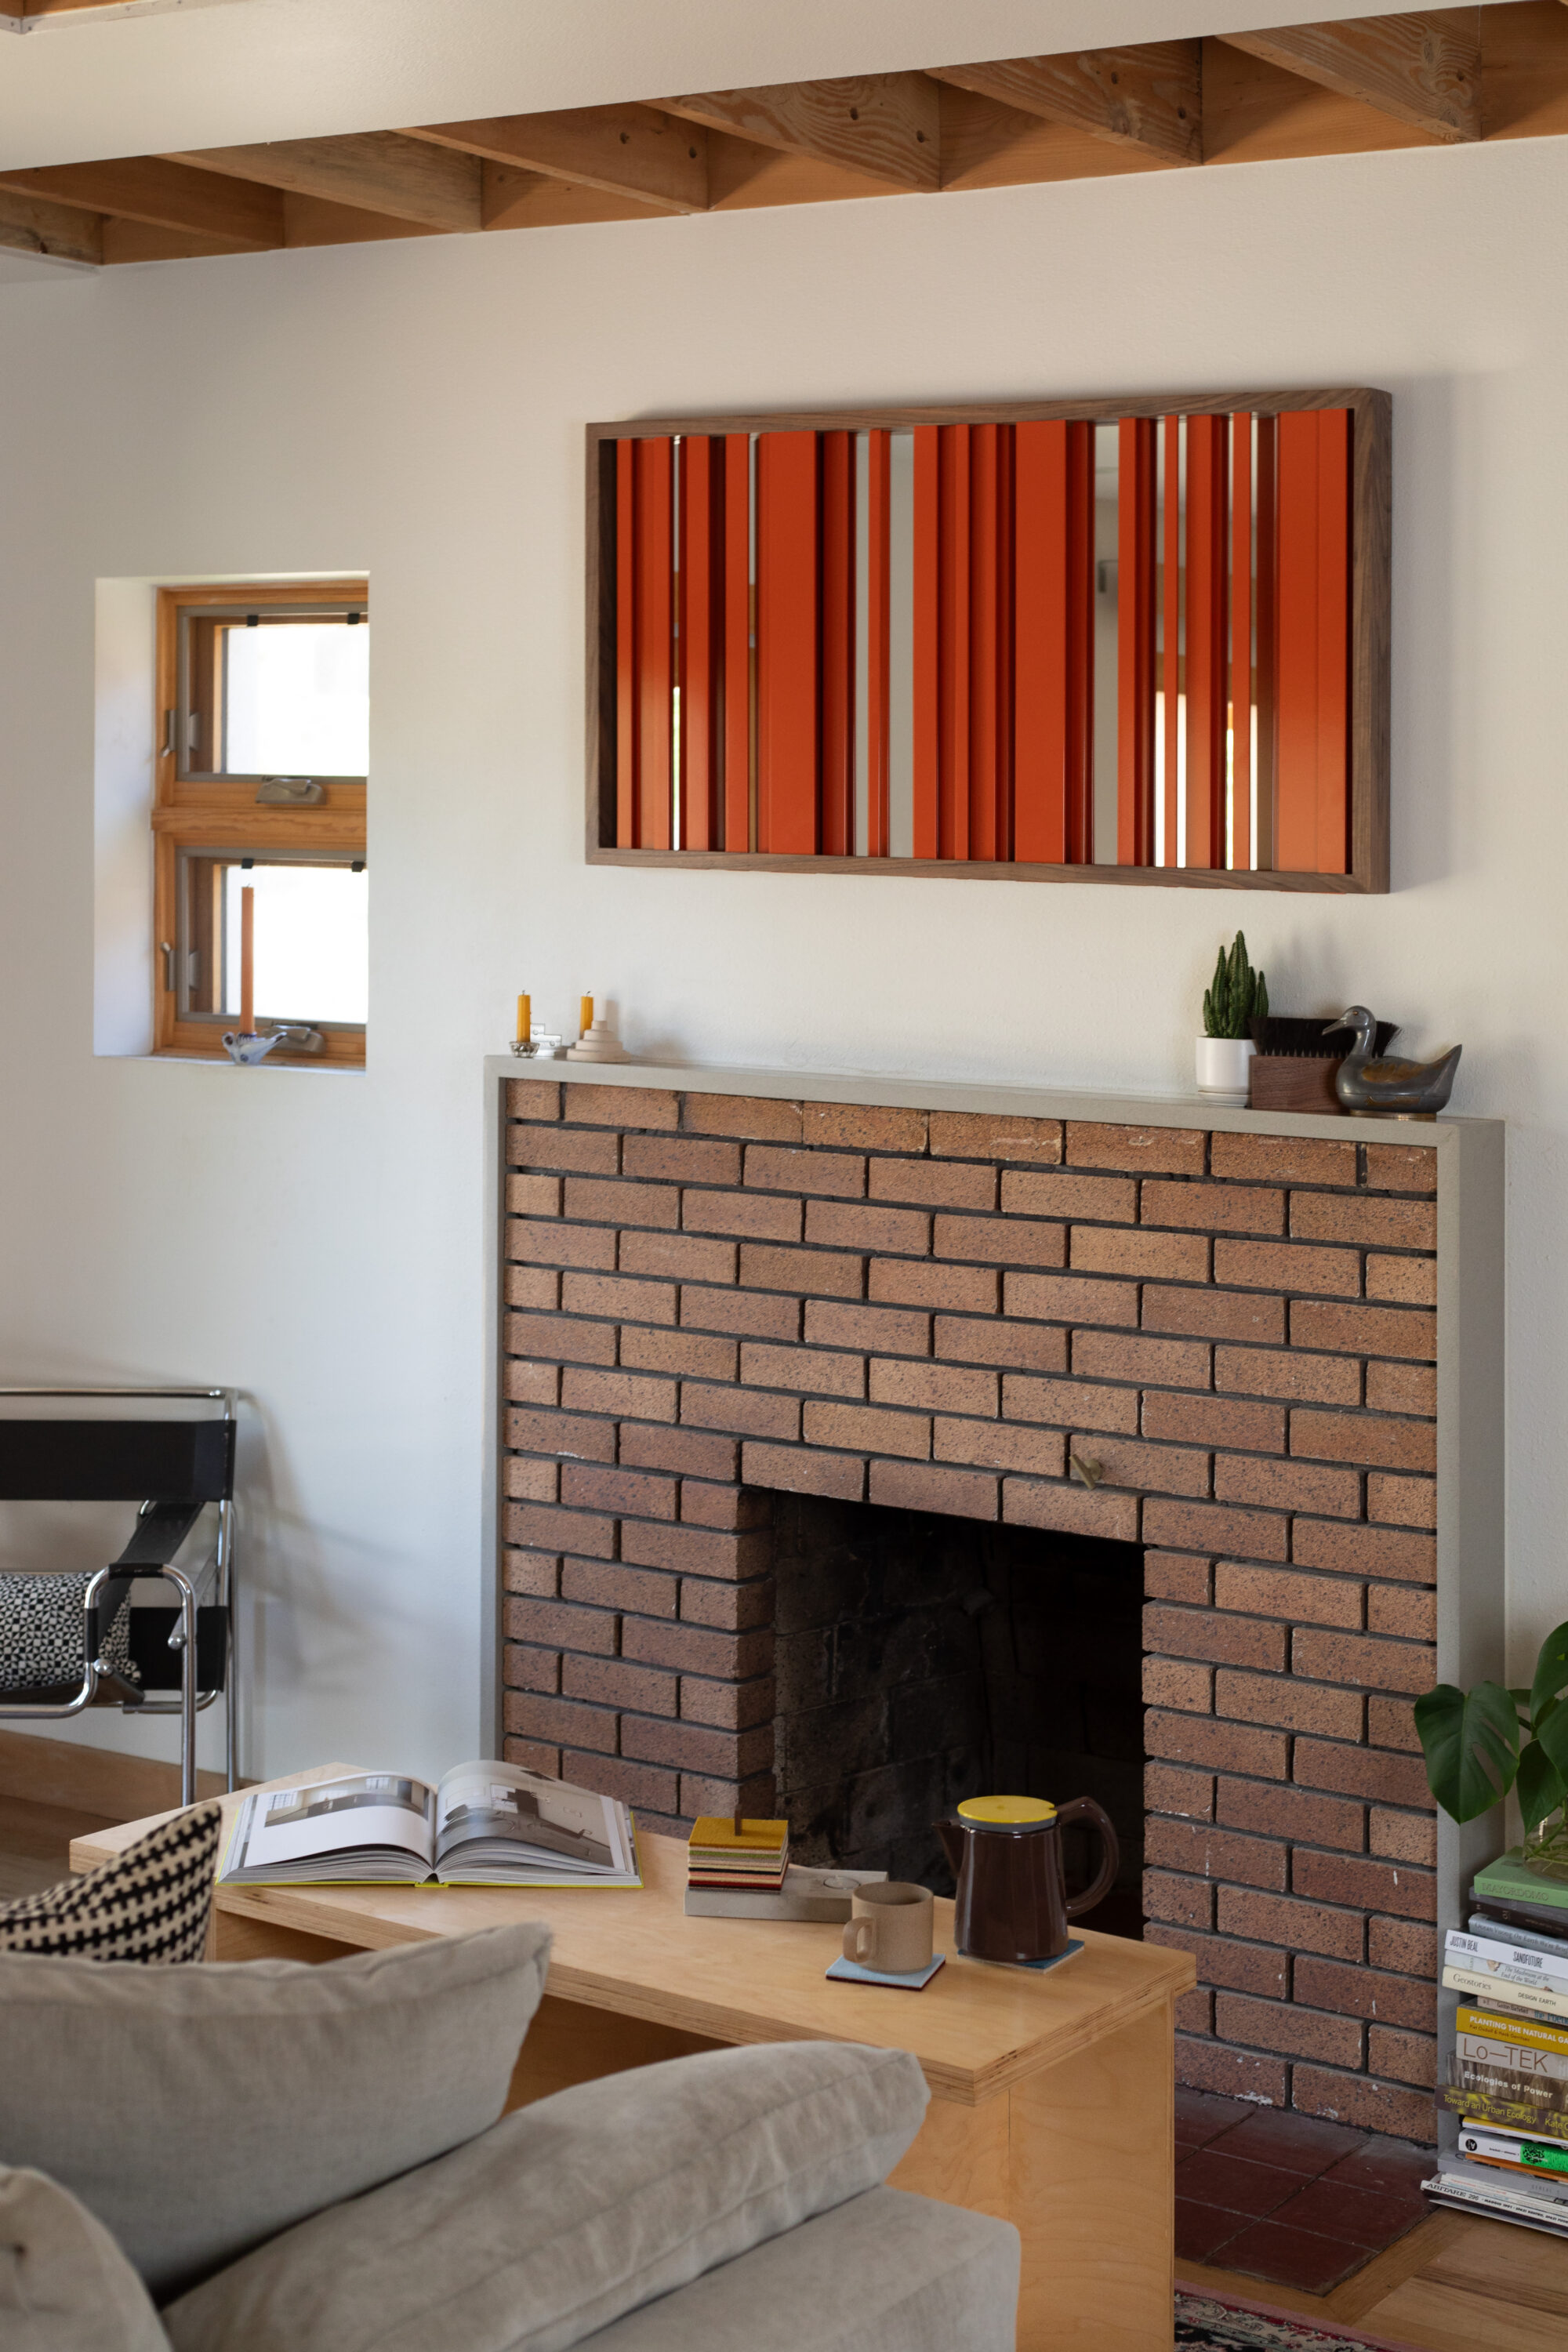 a living space in a modern home with a brick fireplace. above the fireplace hangs a horizontal rectangle. It is framed in dark wood, and red bands of metal are positioned vertically in the frame.